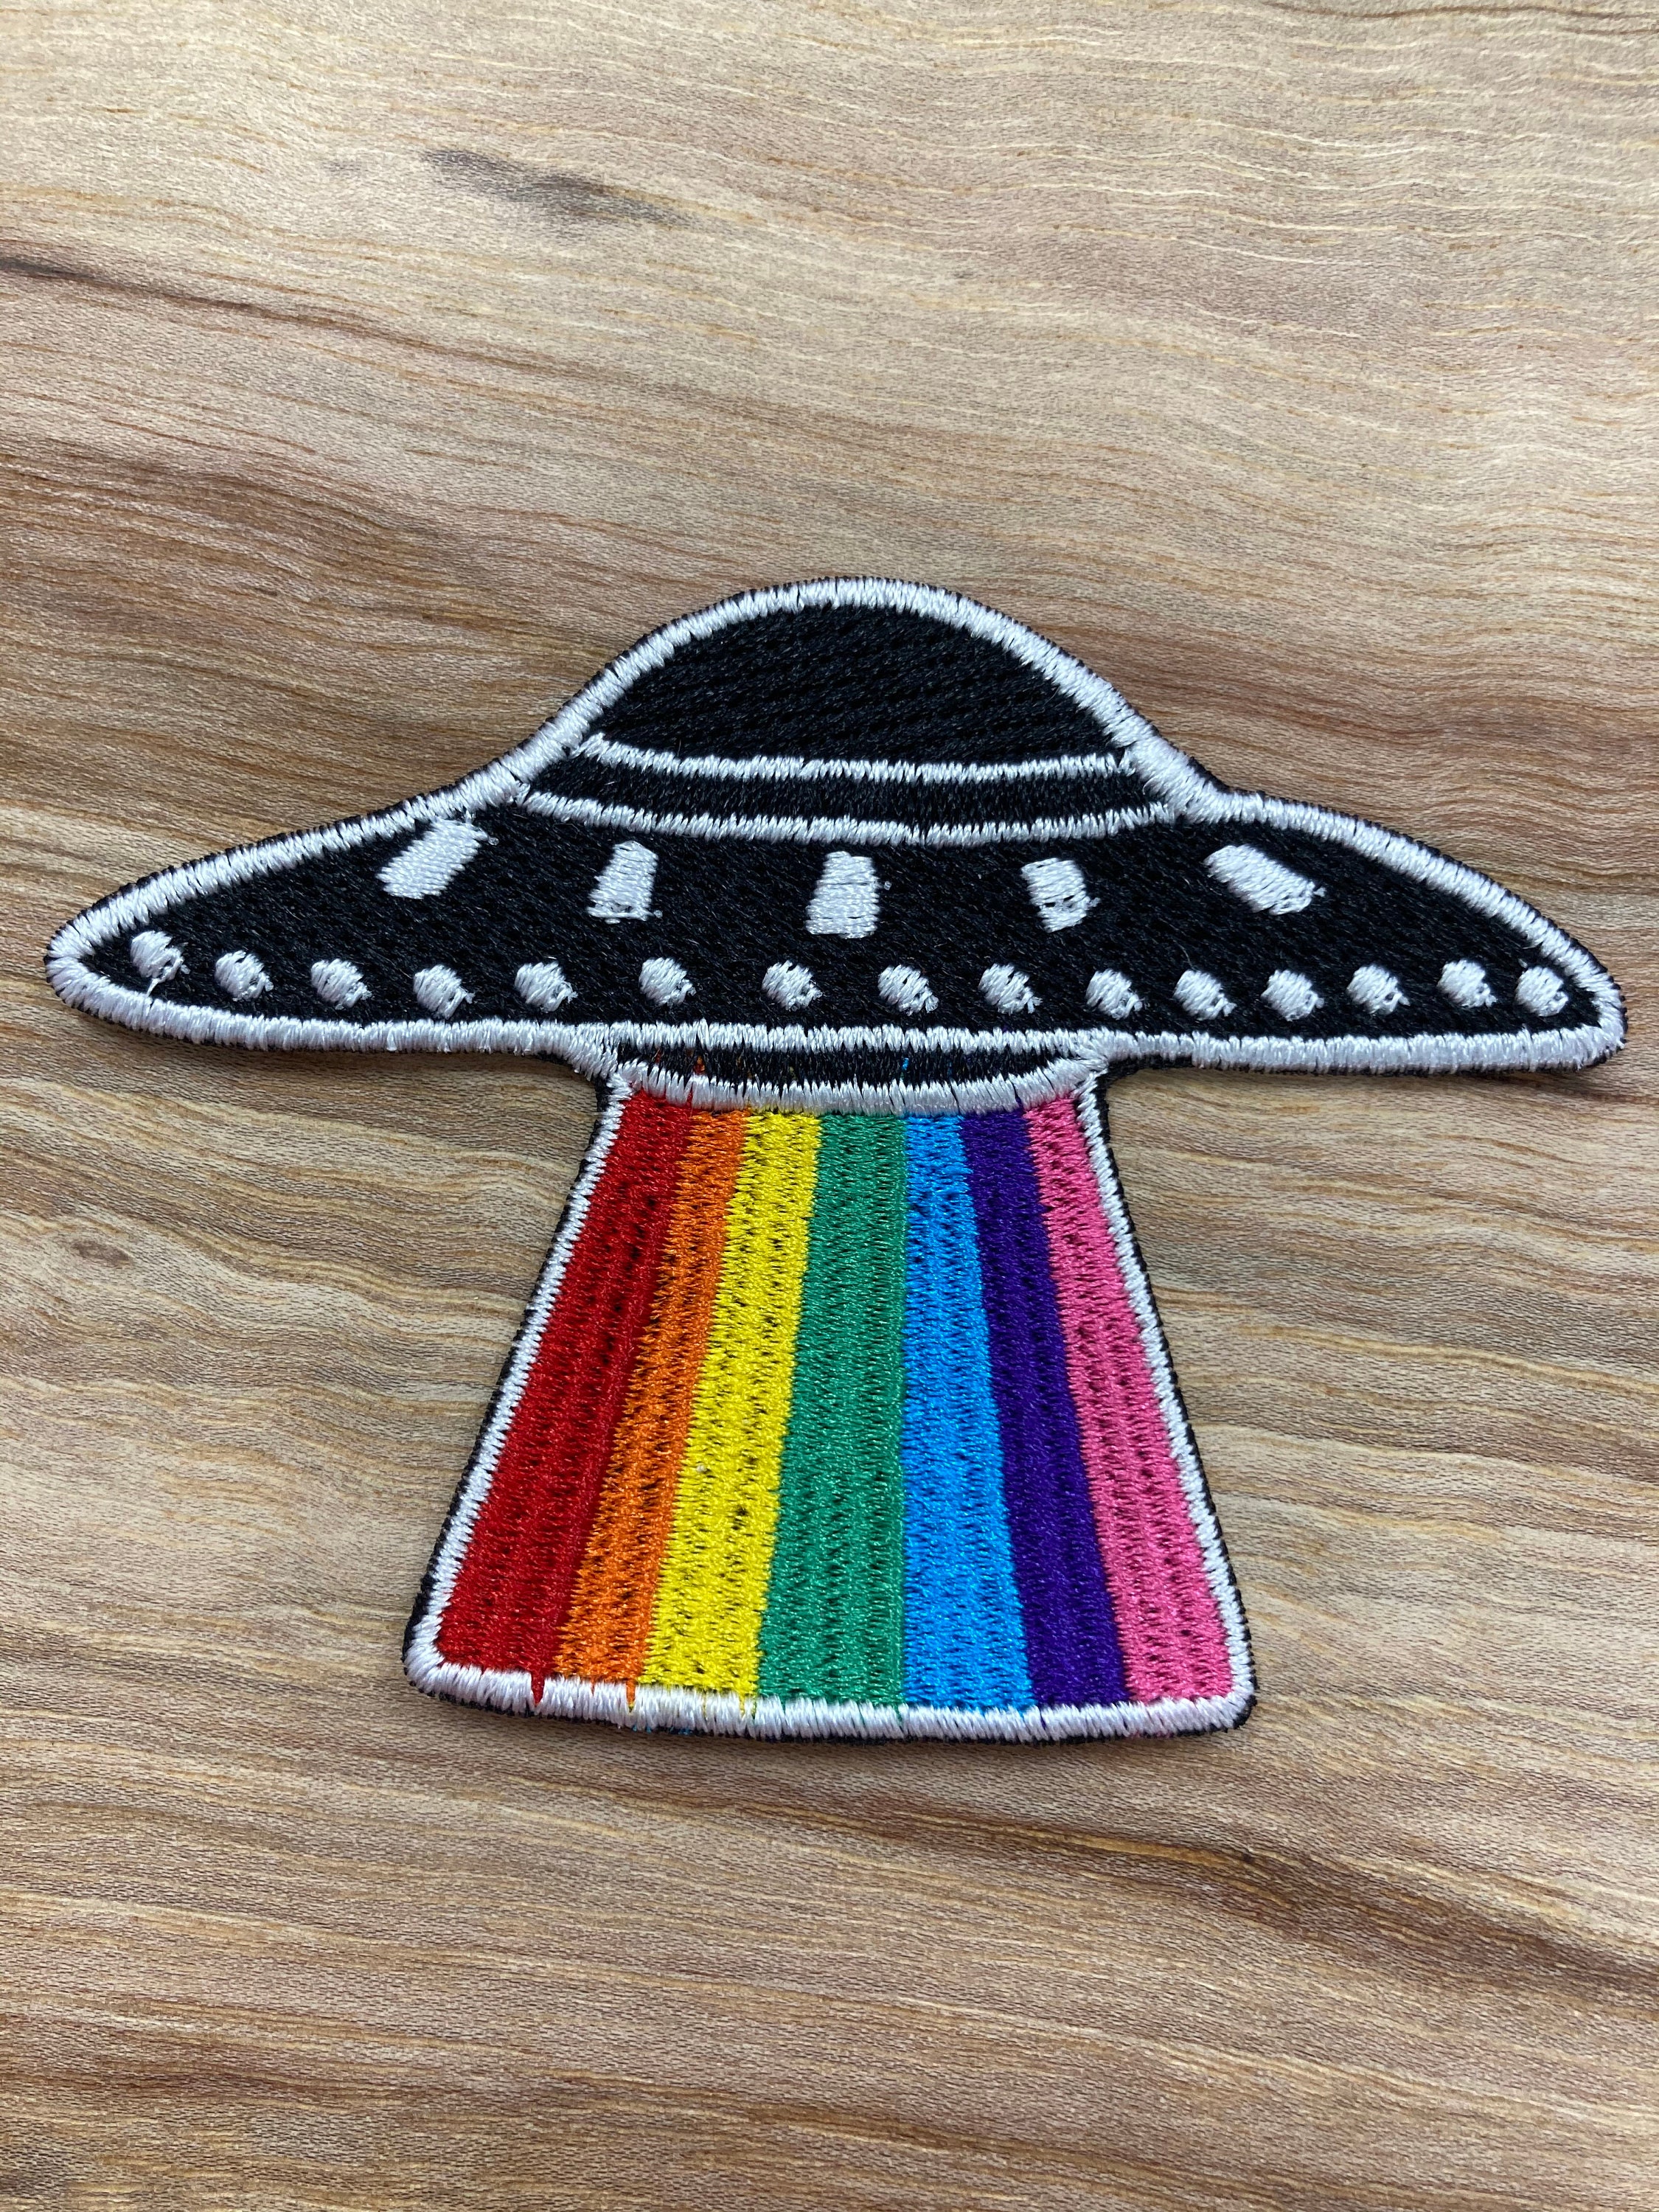 New Arrival Round Space Alien Rocket Eyes Stranger Things UFO Iron Patch  for Clothing Punk Embroidered DIY Parches Applique